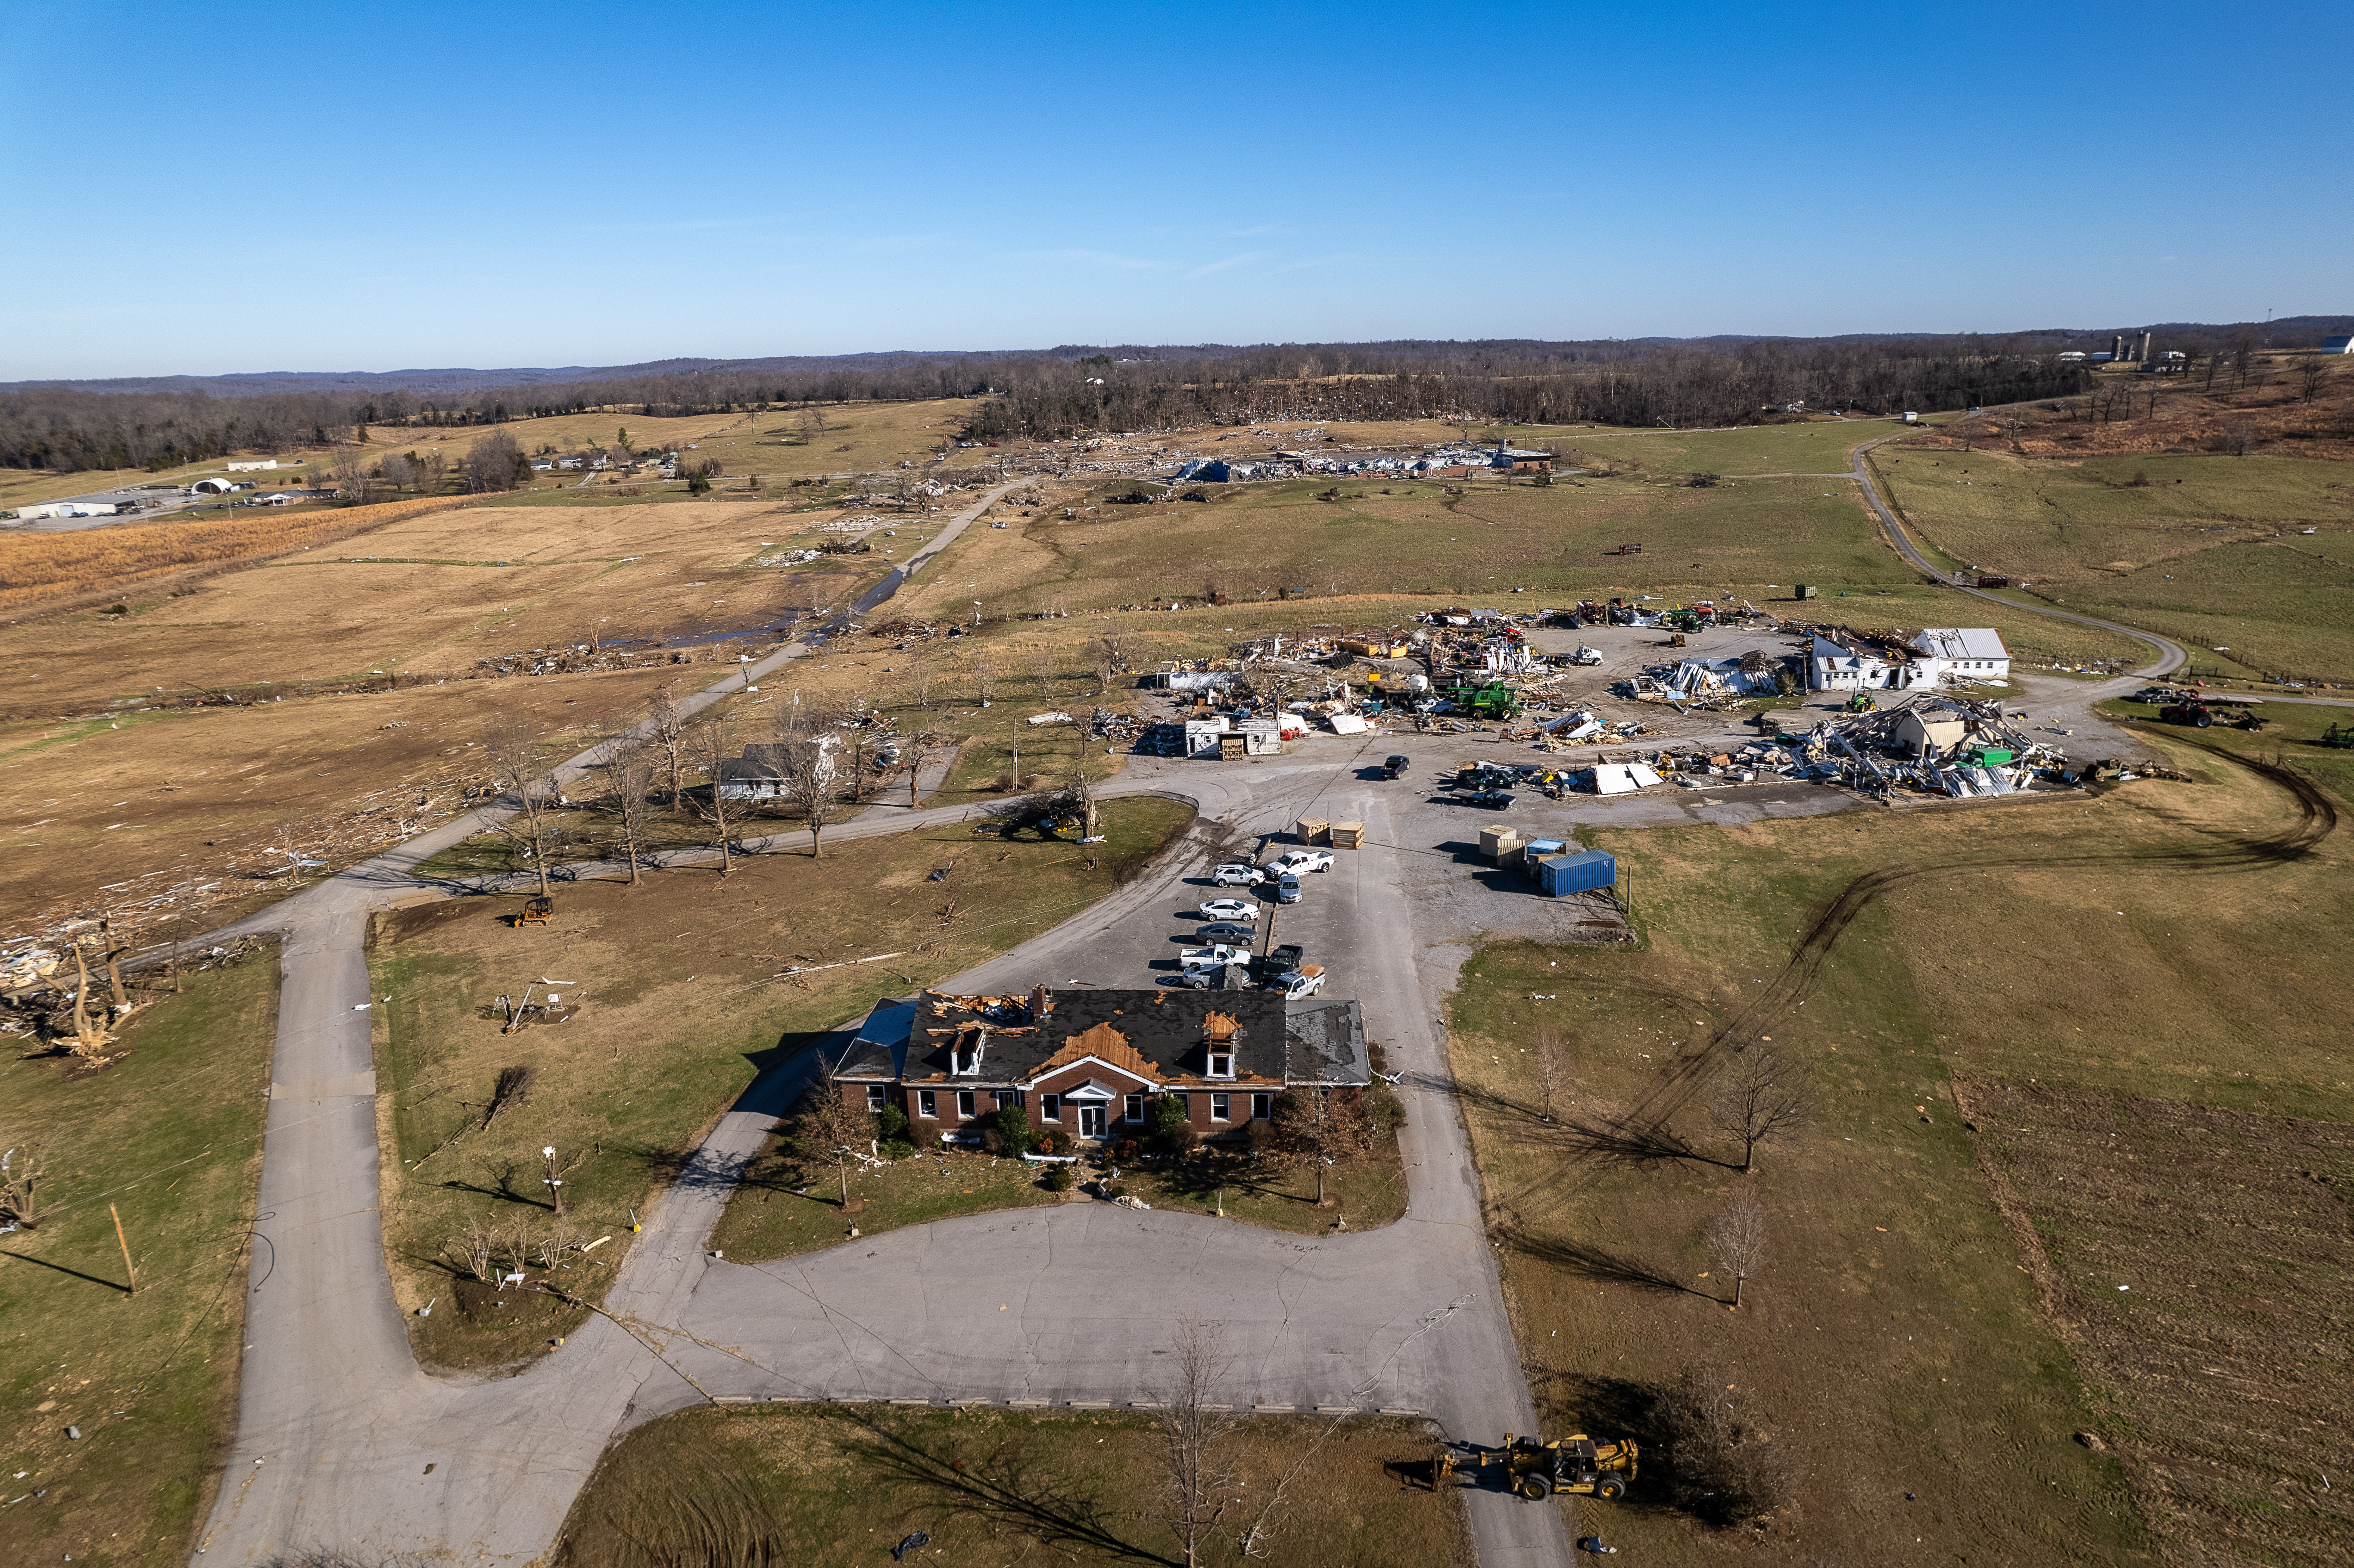 Tornado damage to the UK Research and Education Center. Historical first substation building is in the foreground followed by what was the equipment facilities and the UK Grain and Forage Center of Excellence in the background.